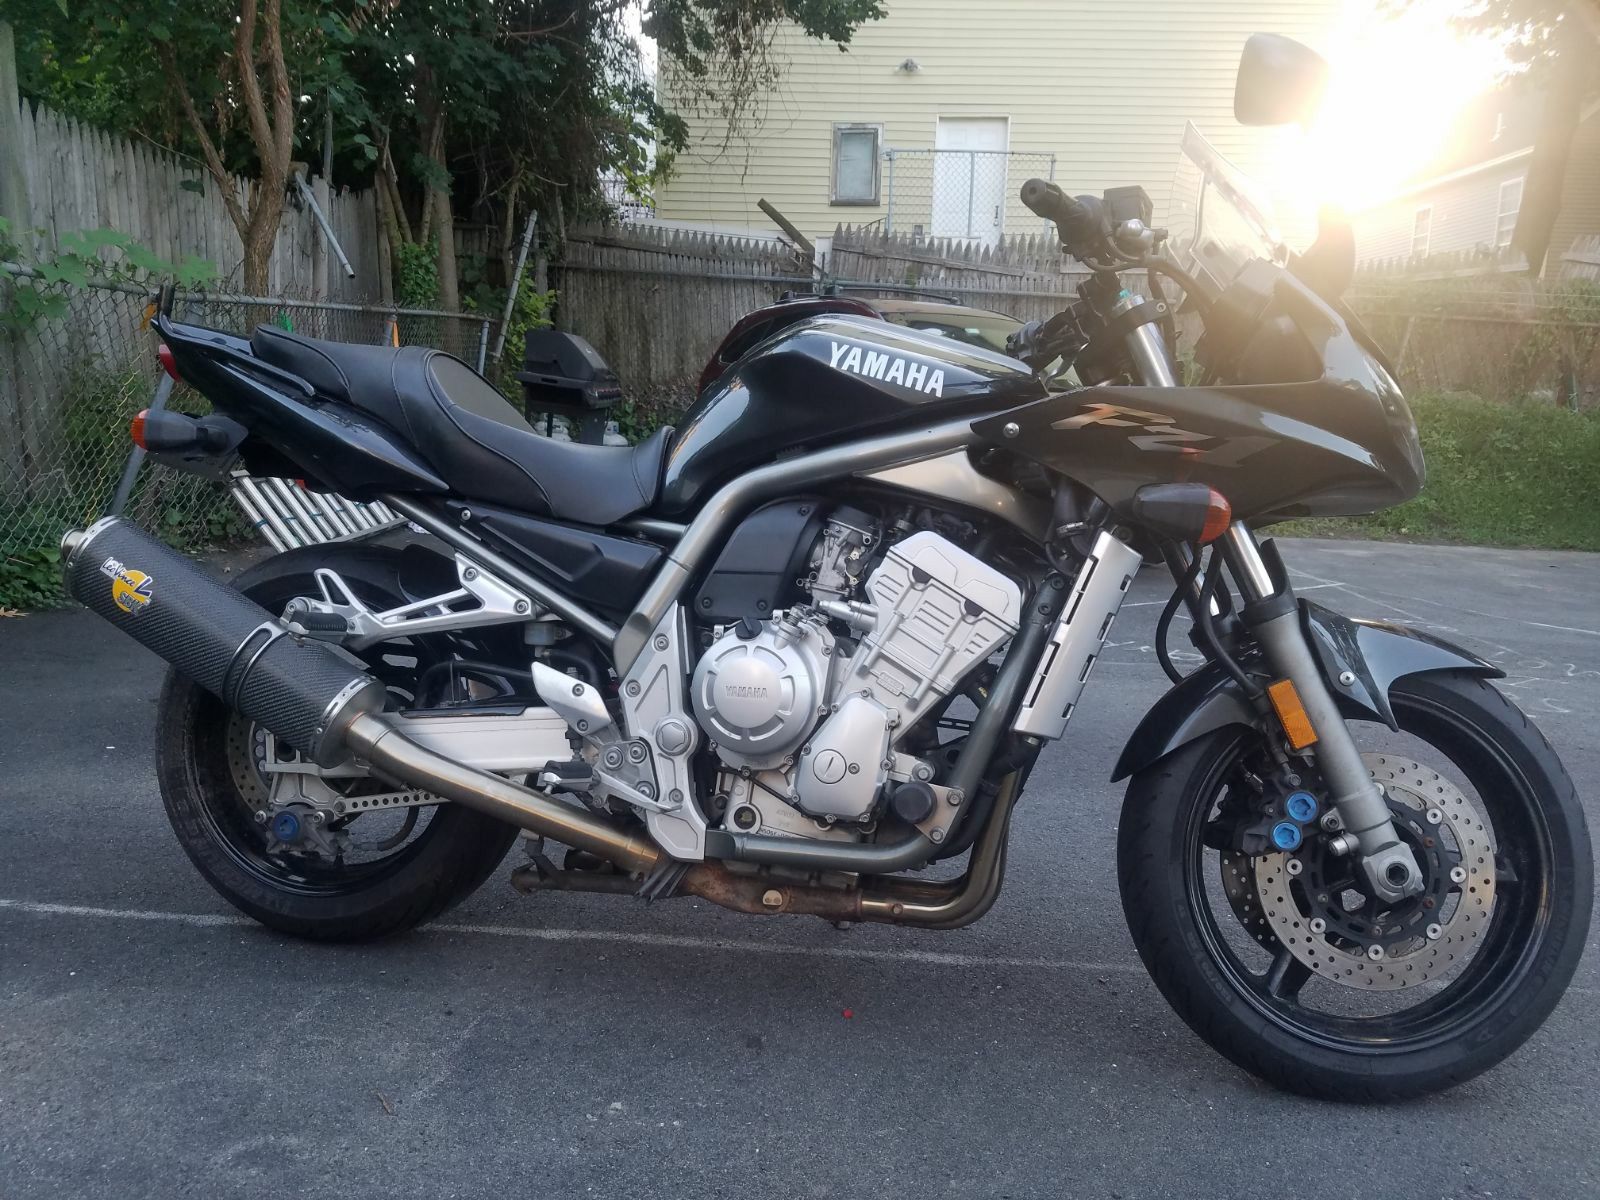 Motorcycle Yamaha FZ1__ 2002 4 cylinder, 5 speed 022-973 miles only Price $2,700.00 Contact me: